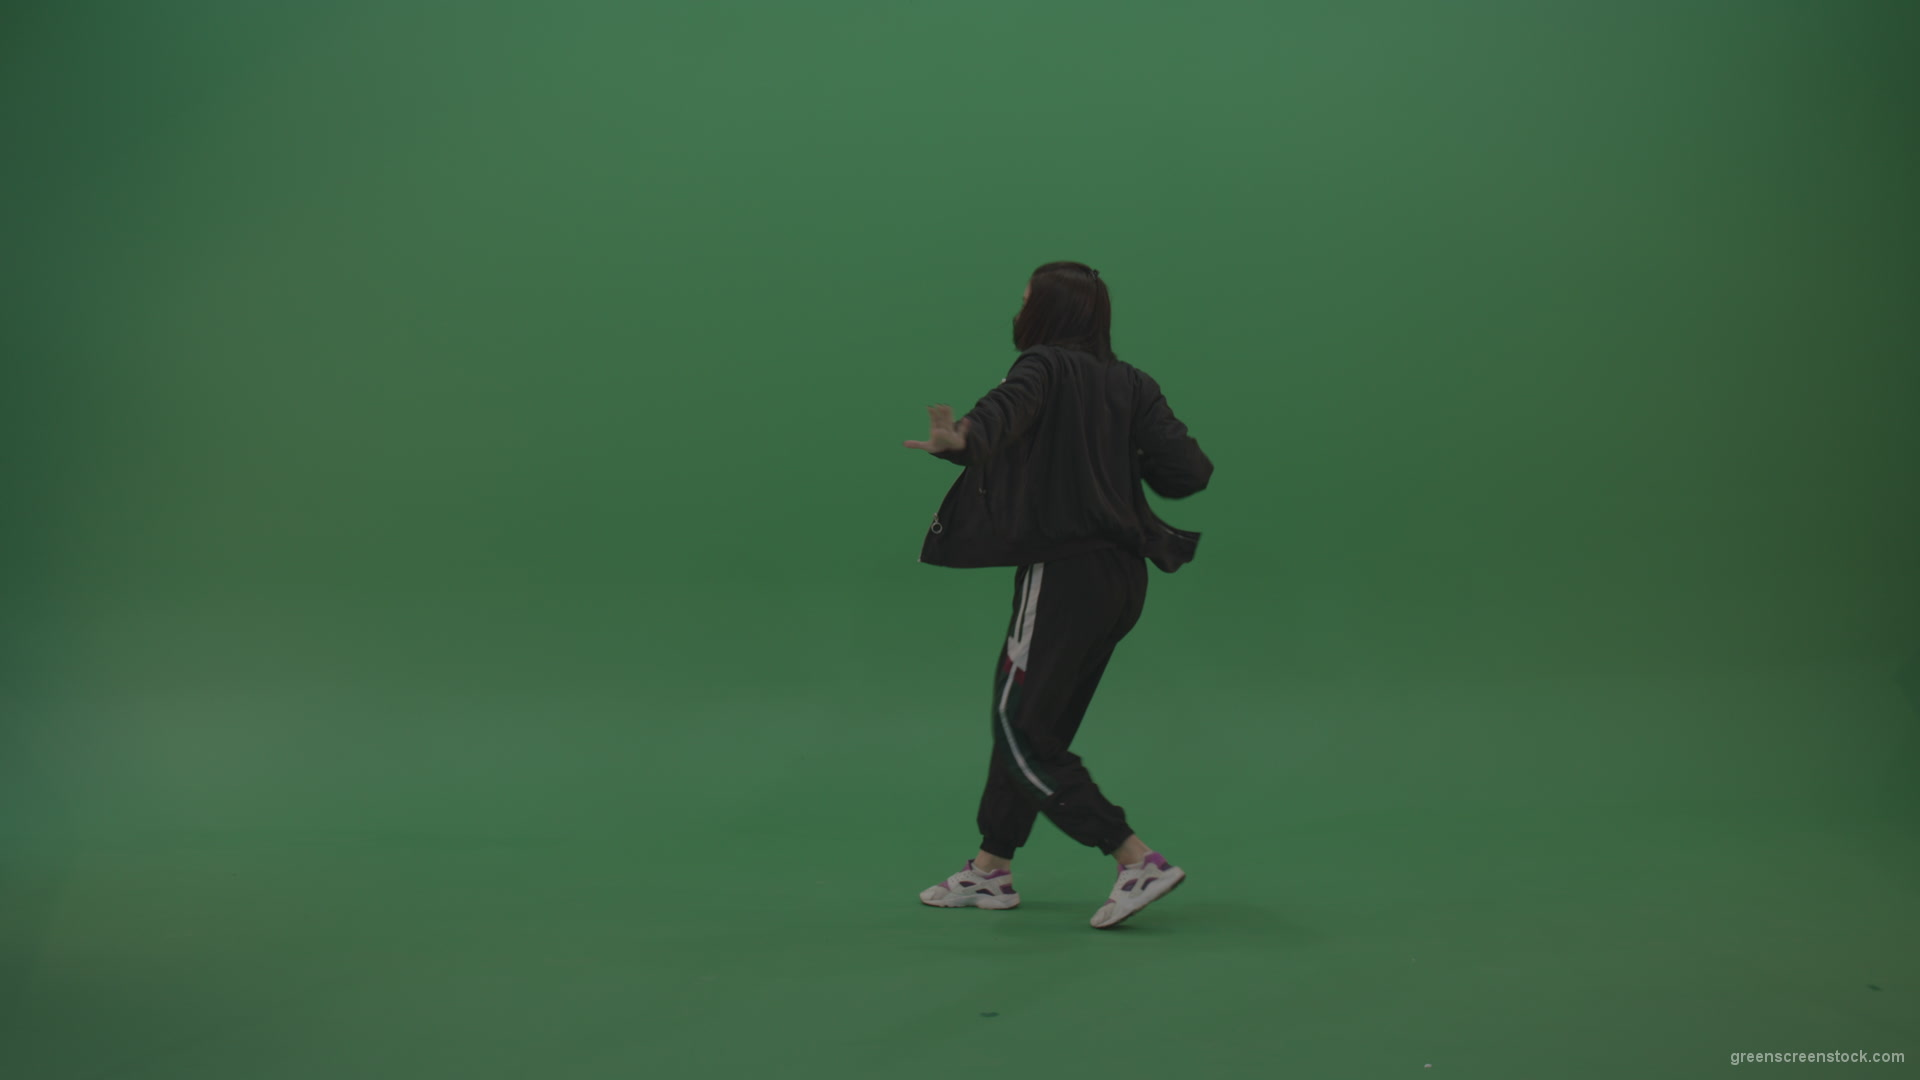 Incredible_Dance_Hip_Hop_Moves_From_Young_Brunette_Female_Wearing_Black_Sweat_Suite_And_White_Trainers_On_Green_Screen_Wall_Background_001 Green Screen Stock